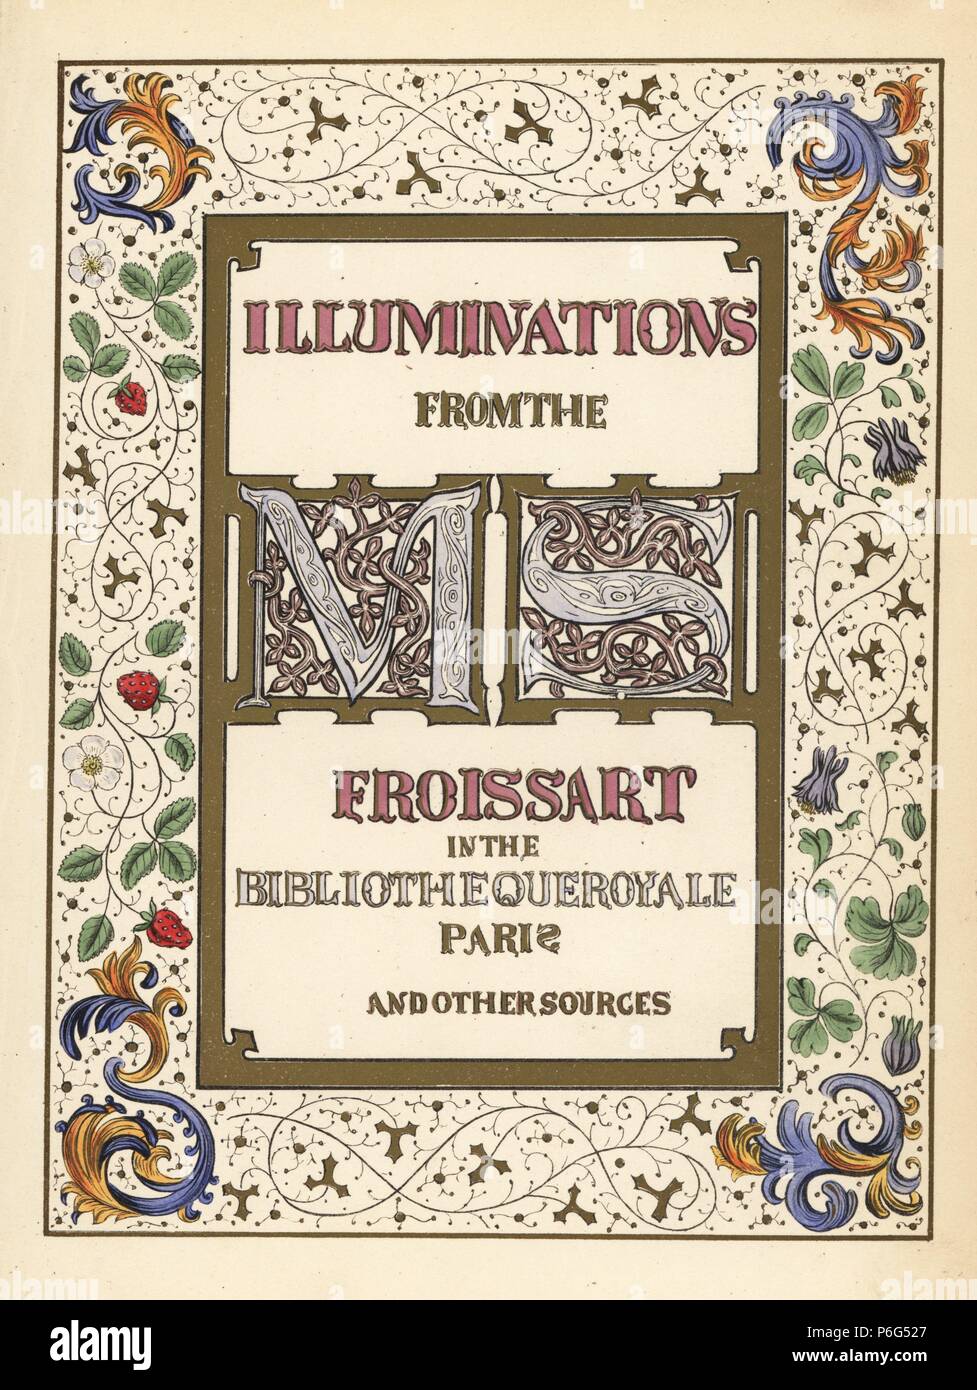 Initials, calligraphy and decorative illuminated borders. Illuminations from the Froissart manuscript in the Bibliotheque Royale Paris. Handcoloured lithograph after an illuminated manuscript from Sir John Froissart's 'Chronicles of England, France, Spain and the Adjoining Countries, from the Latter Part of the Reign of Edward II to the Coronation of Henry IV,' George Routledge, London, 1868. Stock Photo